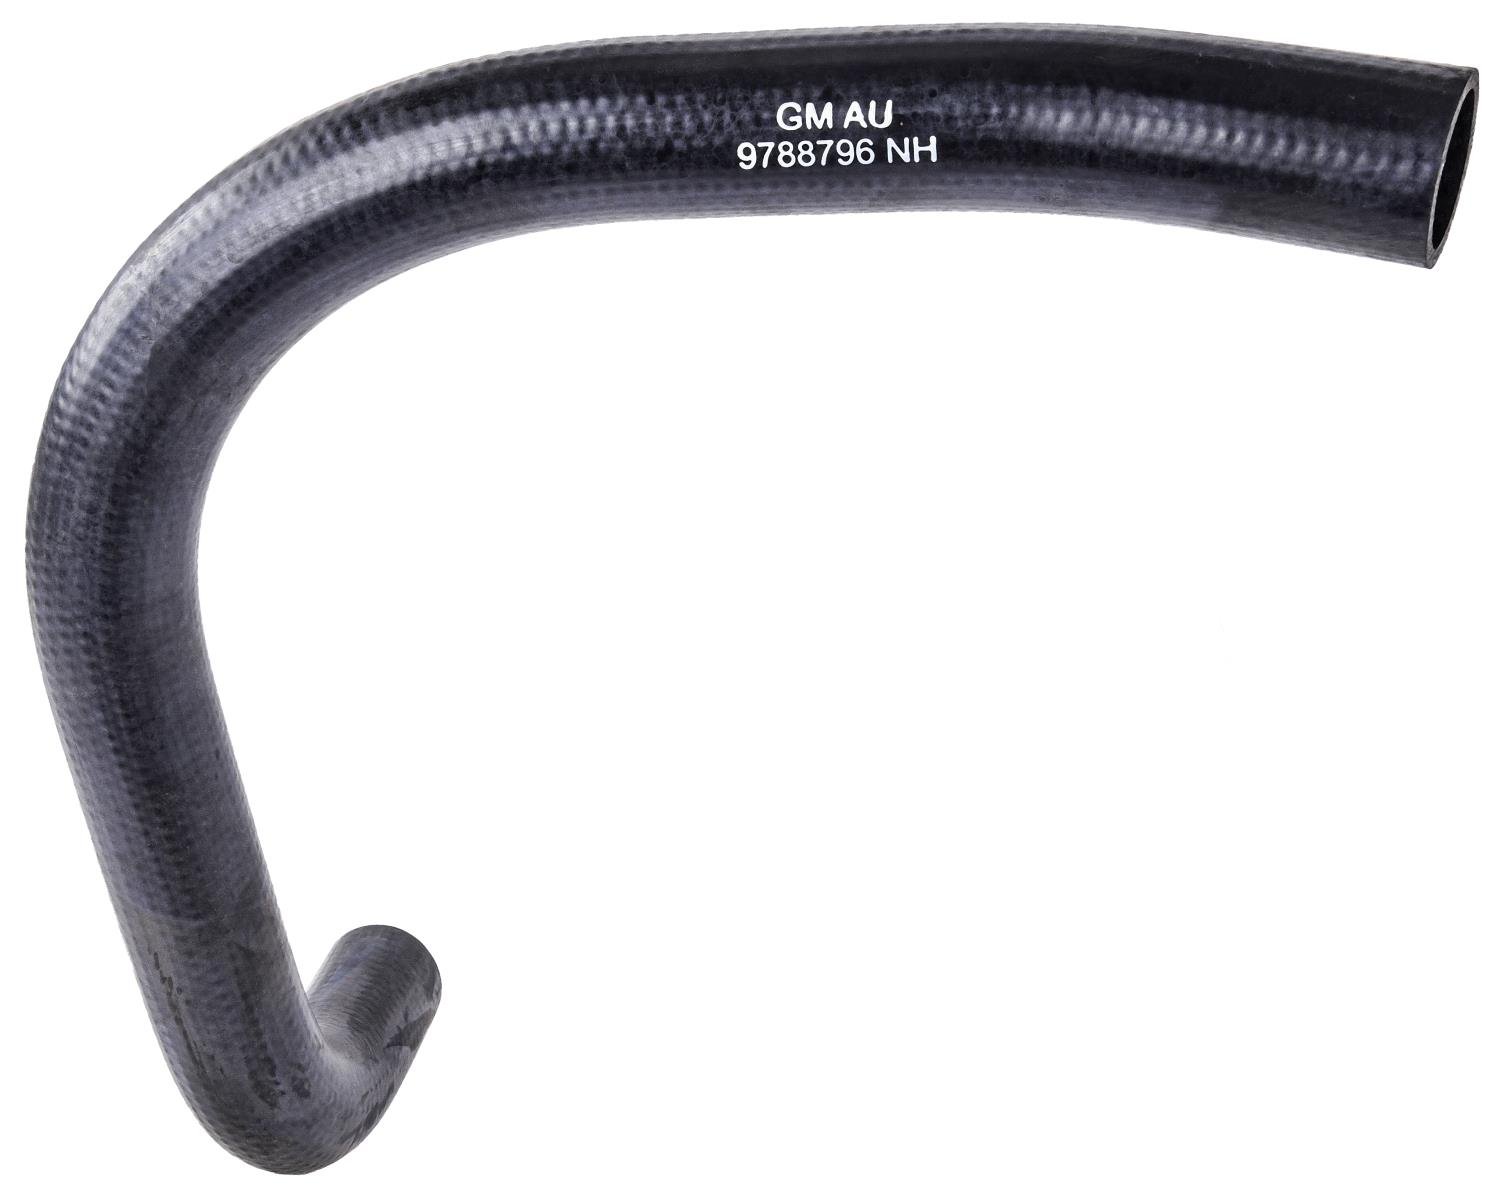 Upper Radiator Hose for 1967 Pontiac GTO [Direct-Fit Replacement for GM 9788796]